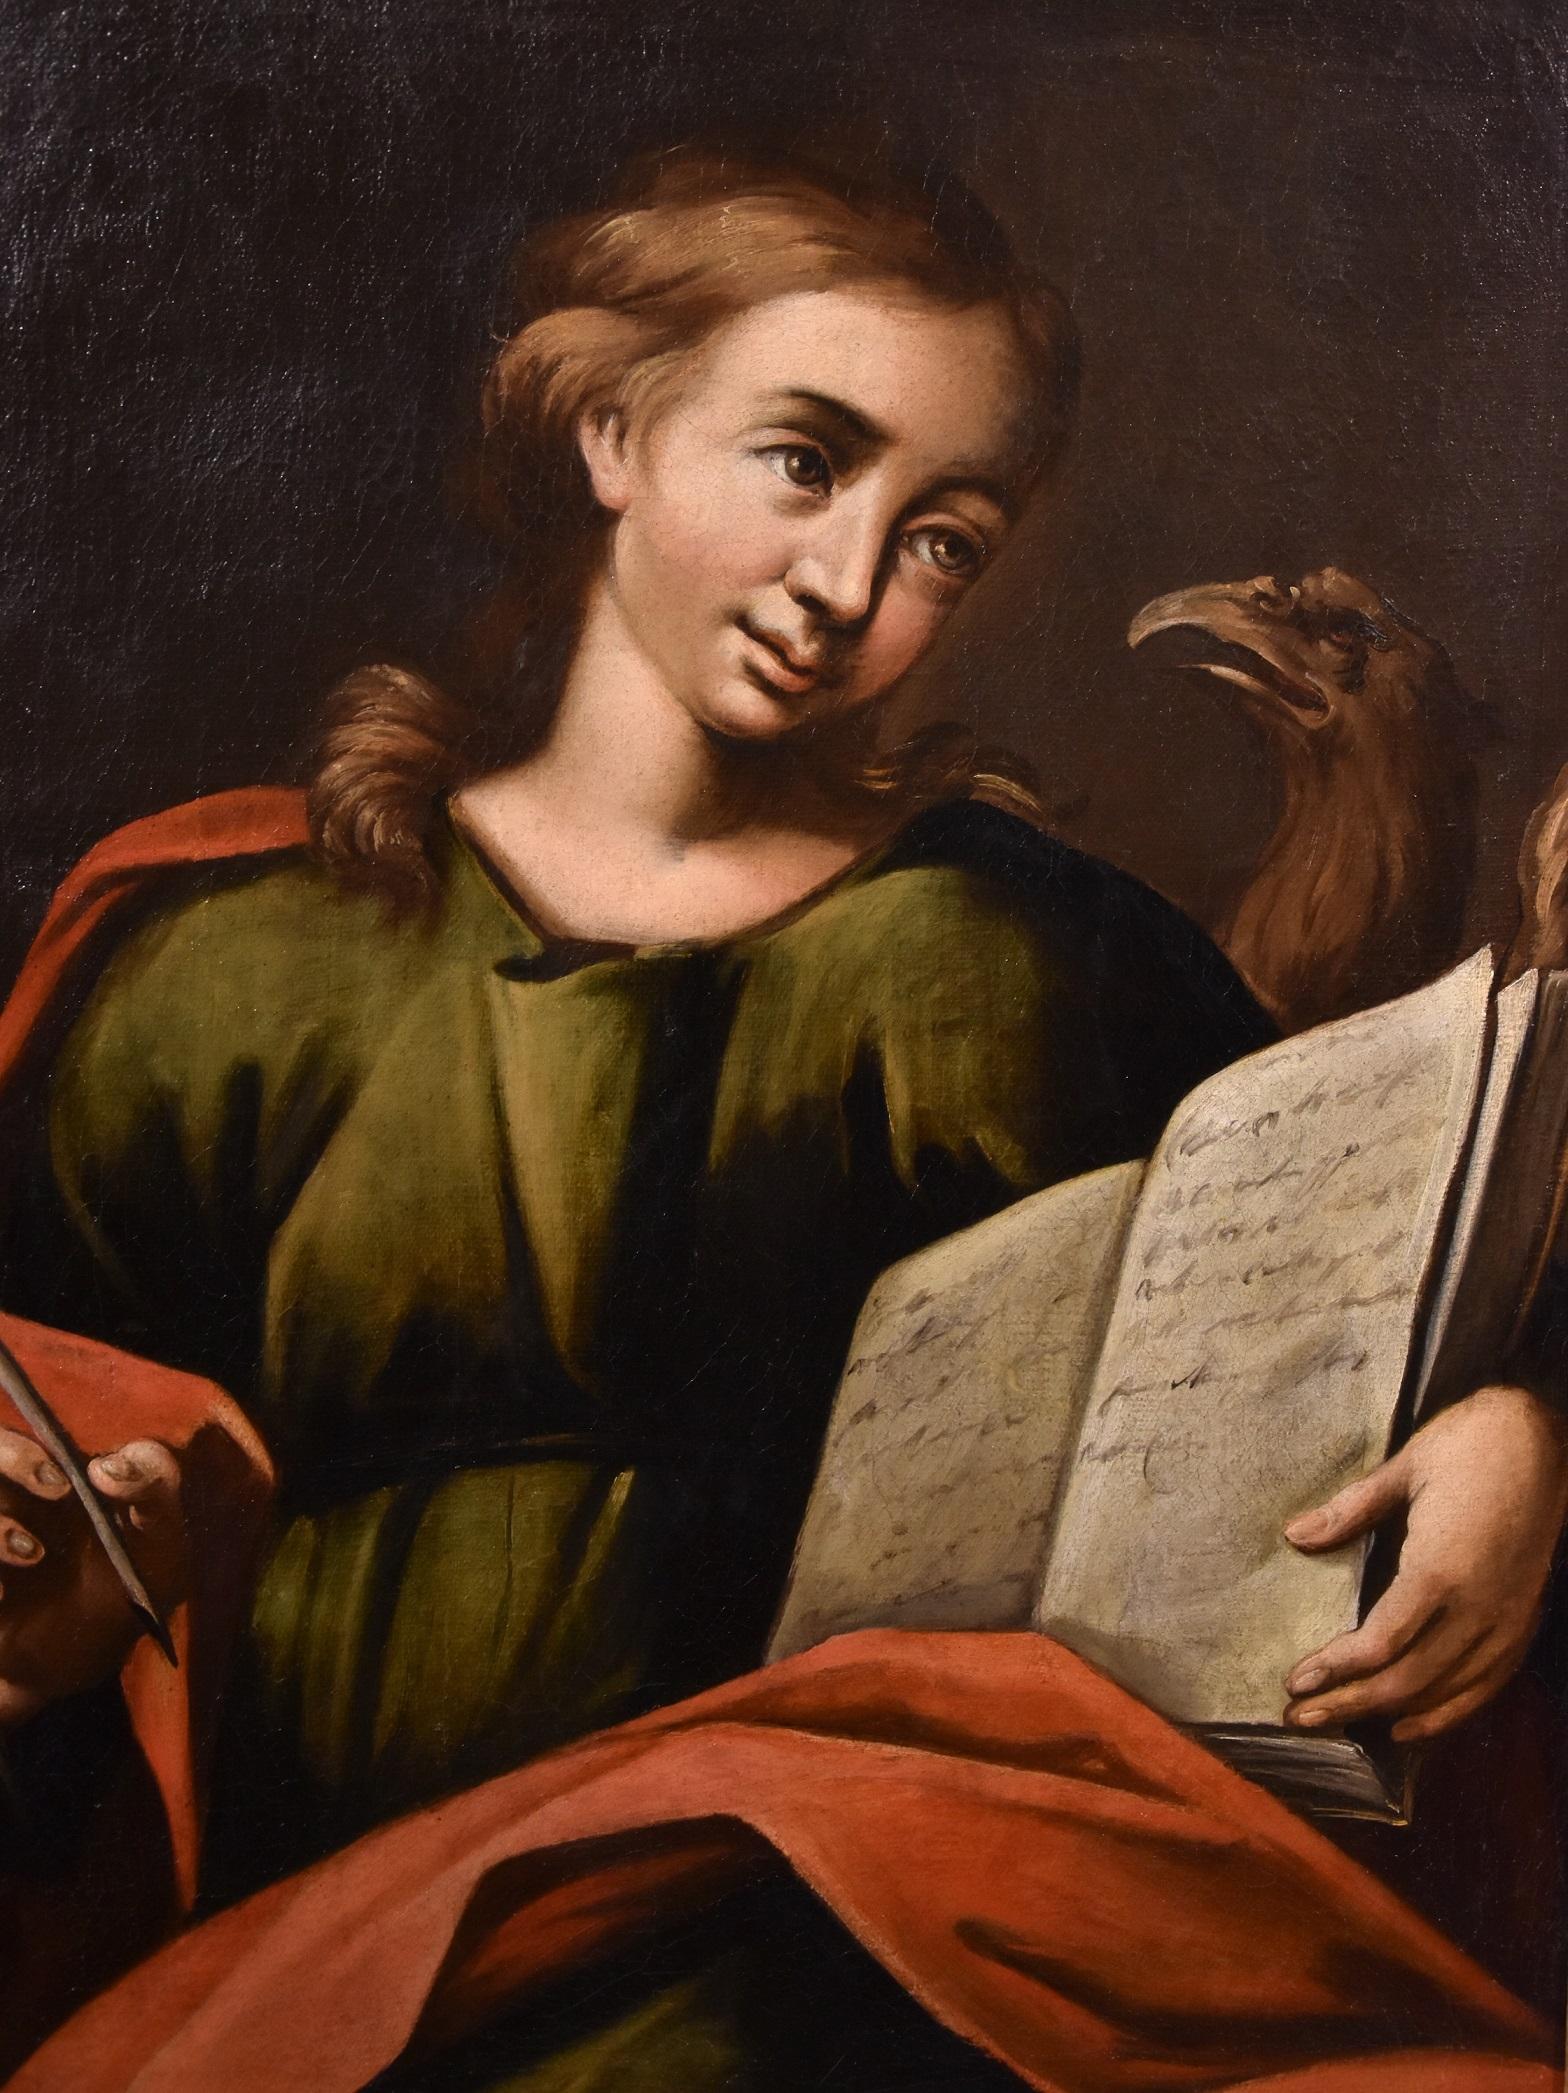 Saint John Evangelist Paint Oil on canvas Old master 18th Century French School  For Sale 1